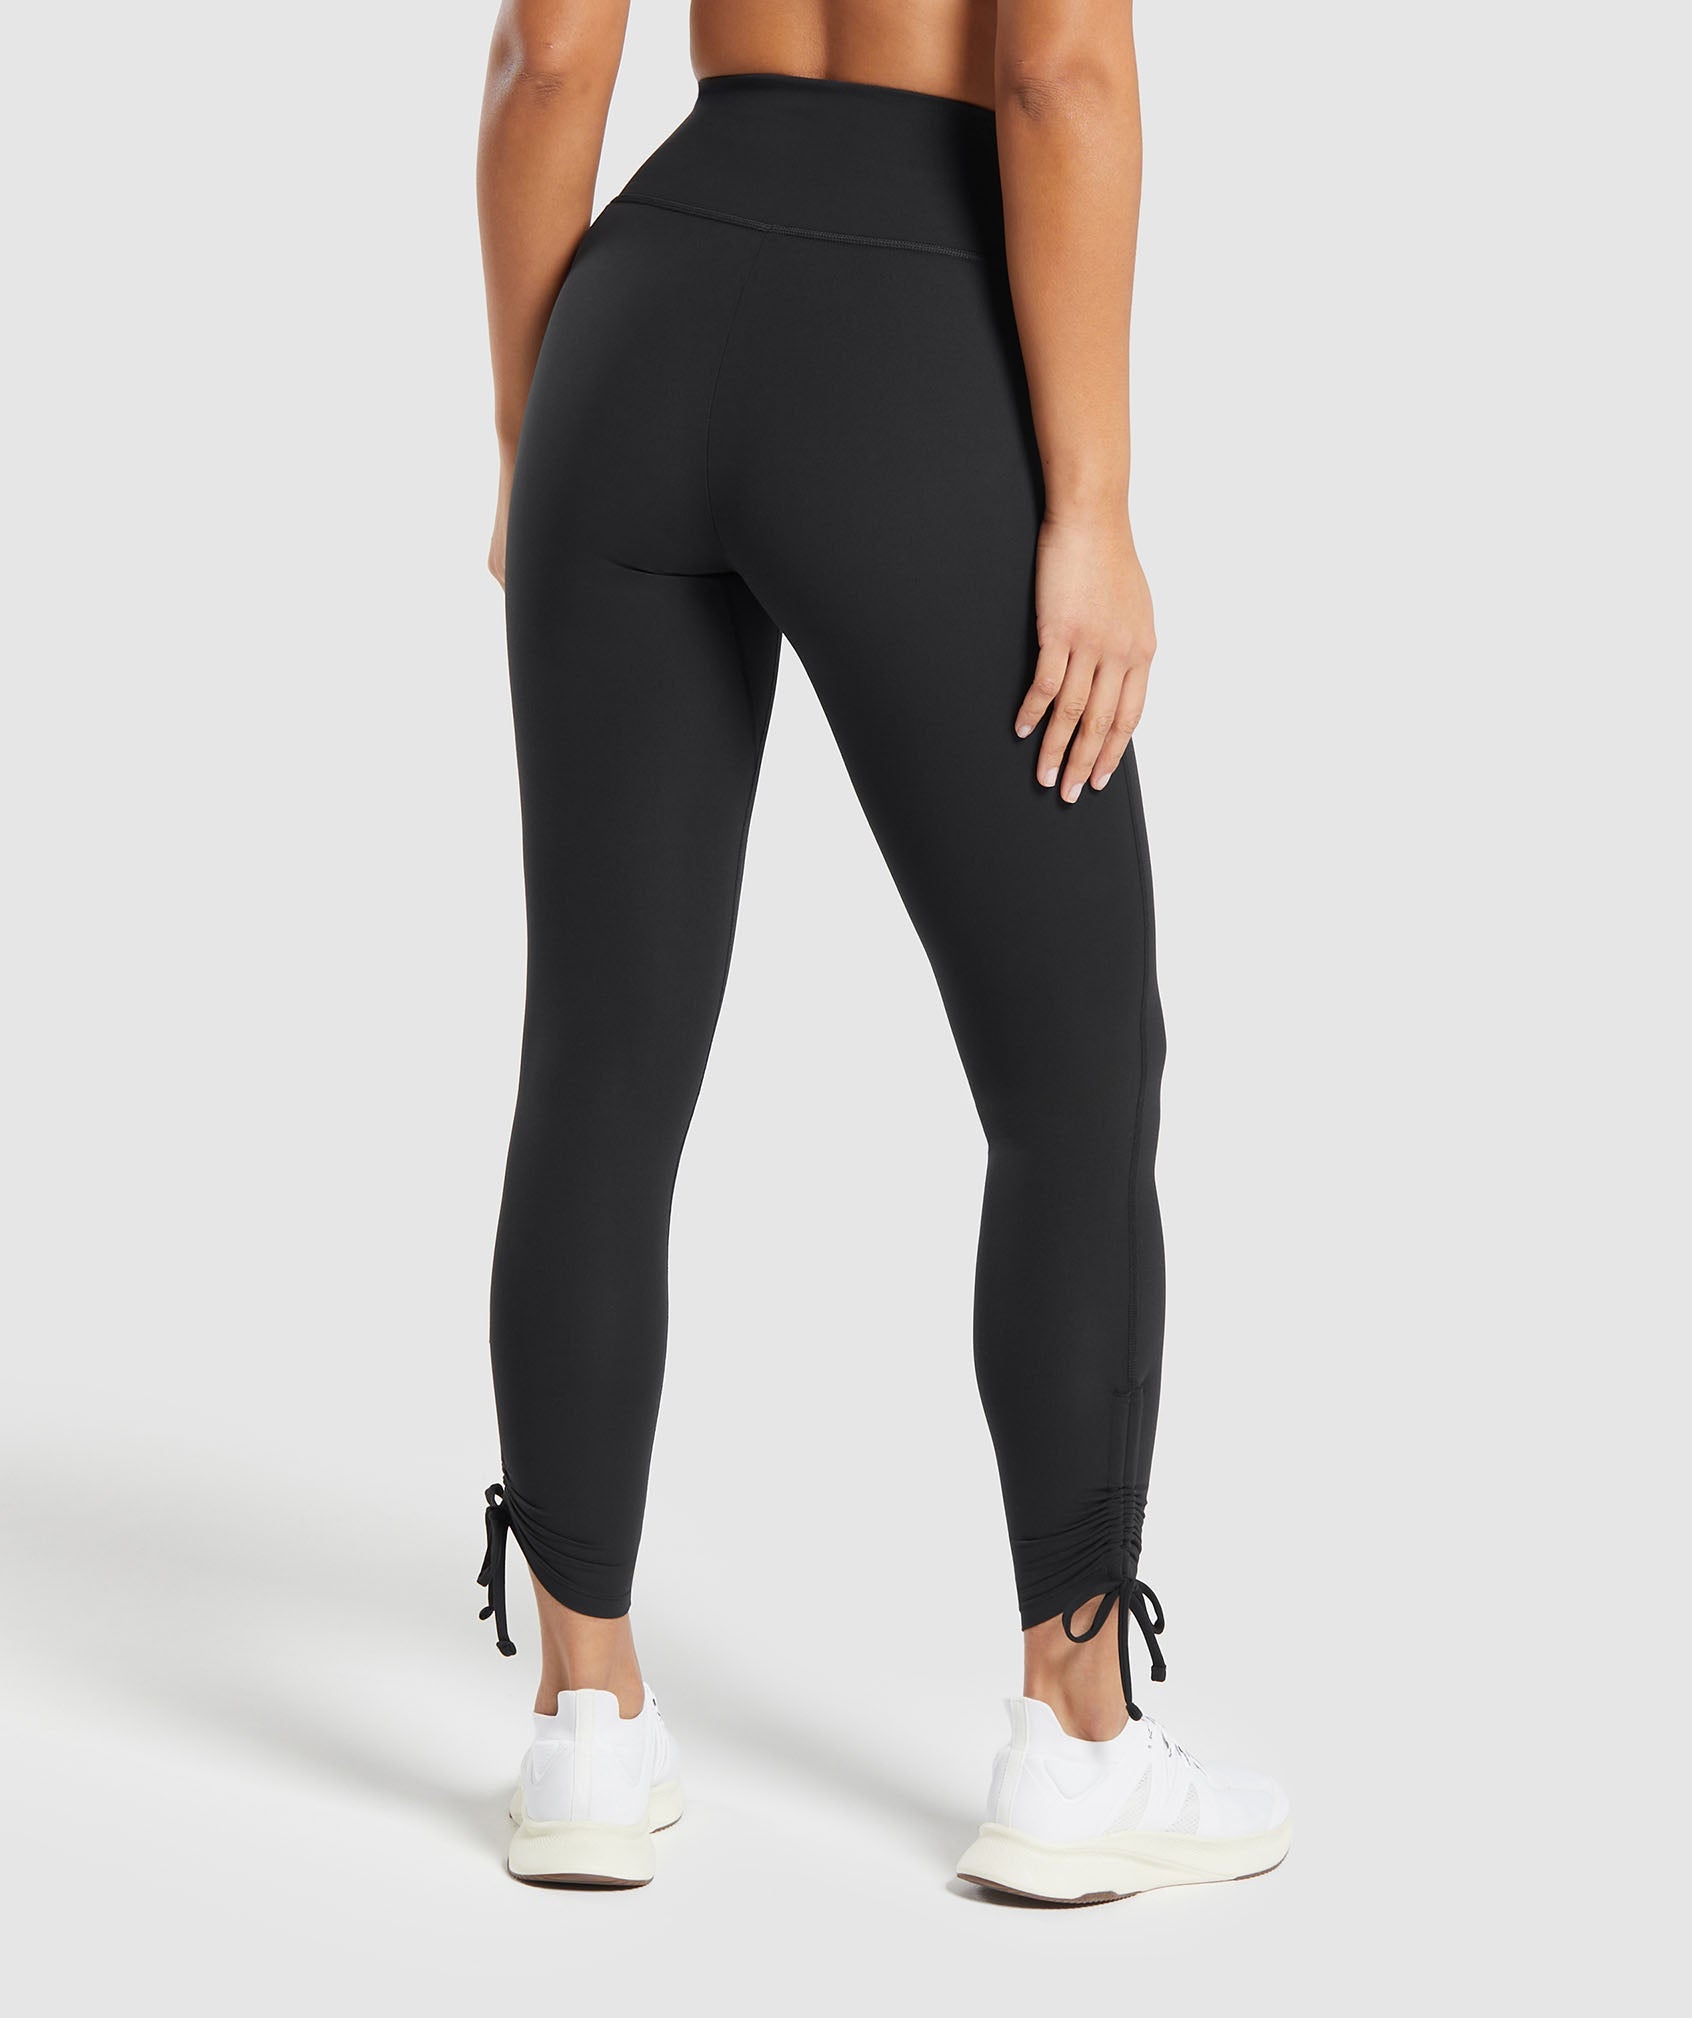 Women's Gym & Running Leggings, Fast Delivery!